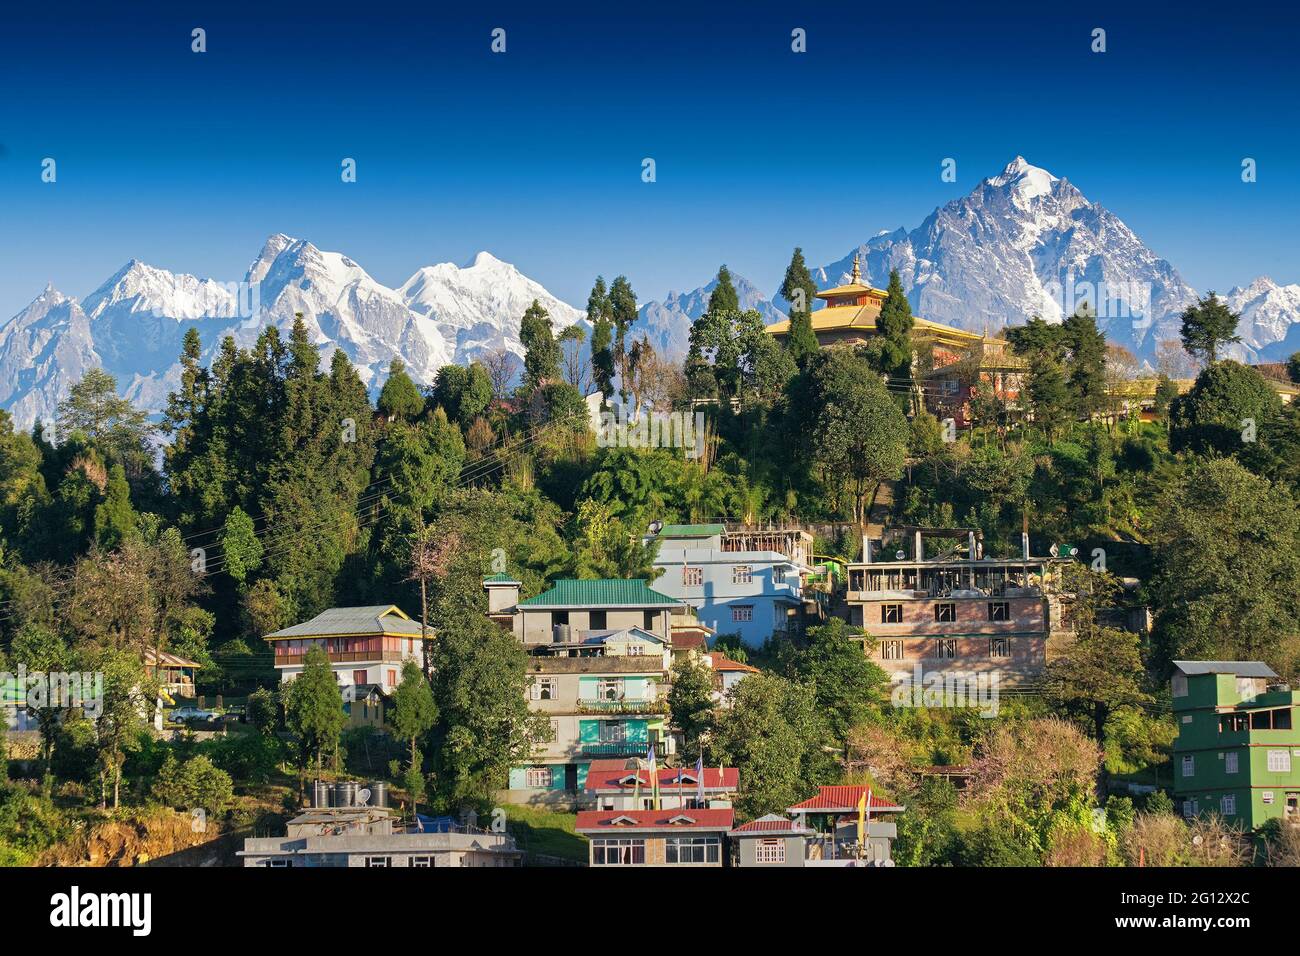 Mount Pandim (right), Mount North kabru (middle) and Mount South Kabru (left) Himalayan Mountain range - with top of Rinchenpong town in foreground. Stock Photo